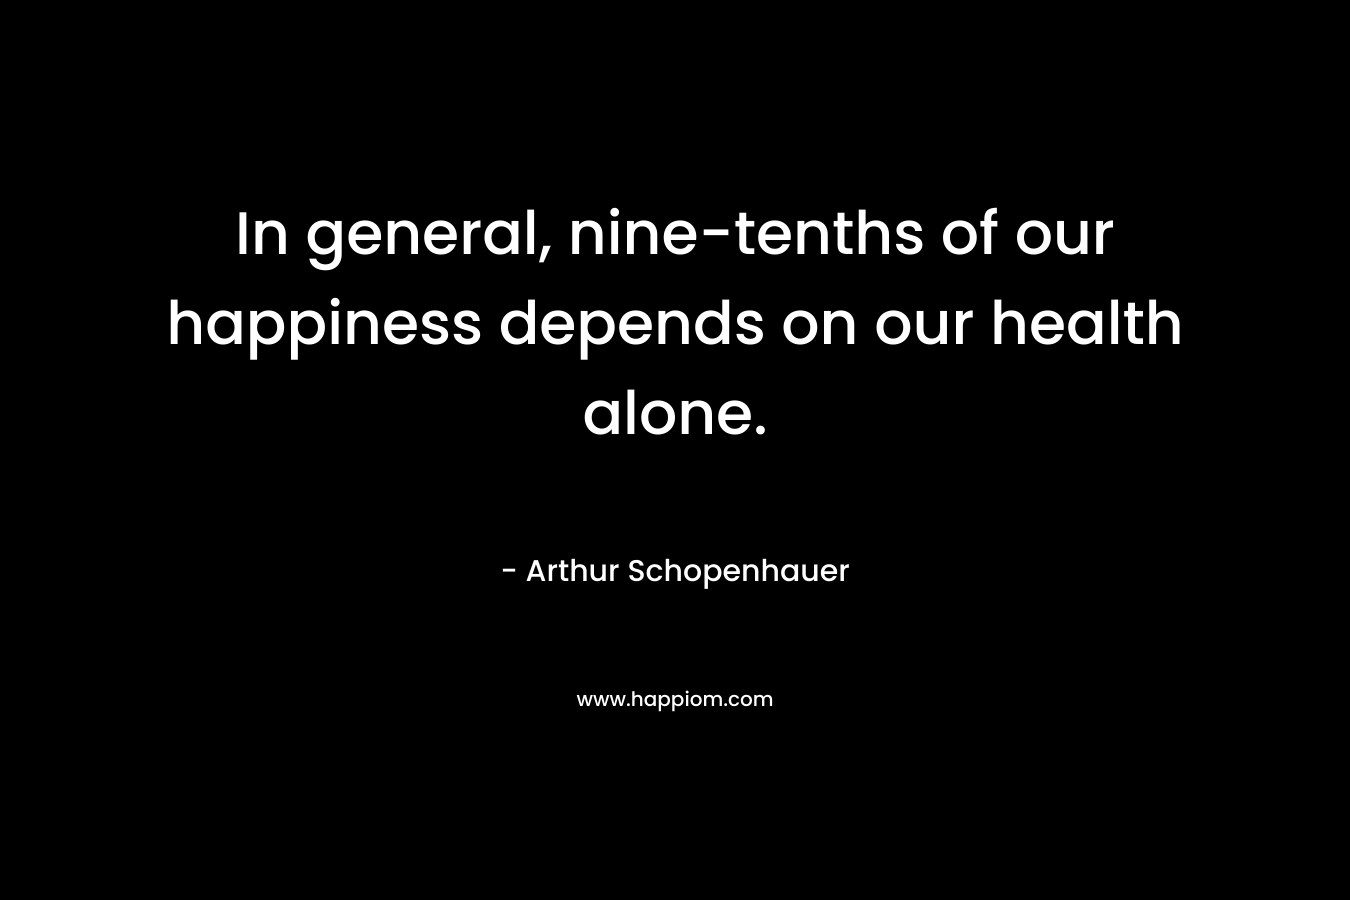 In general, nine-tenths of our happiness depends on our health alone.